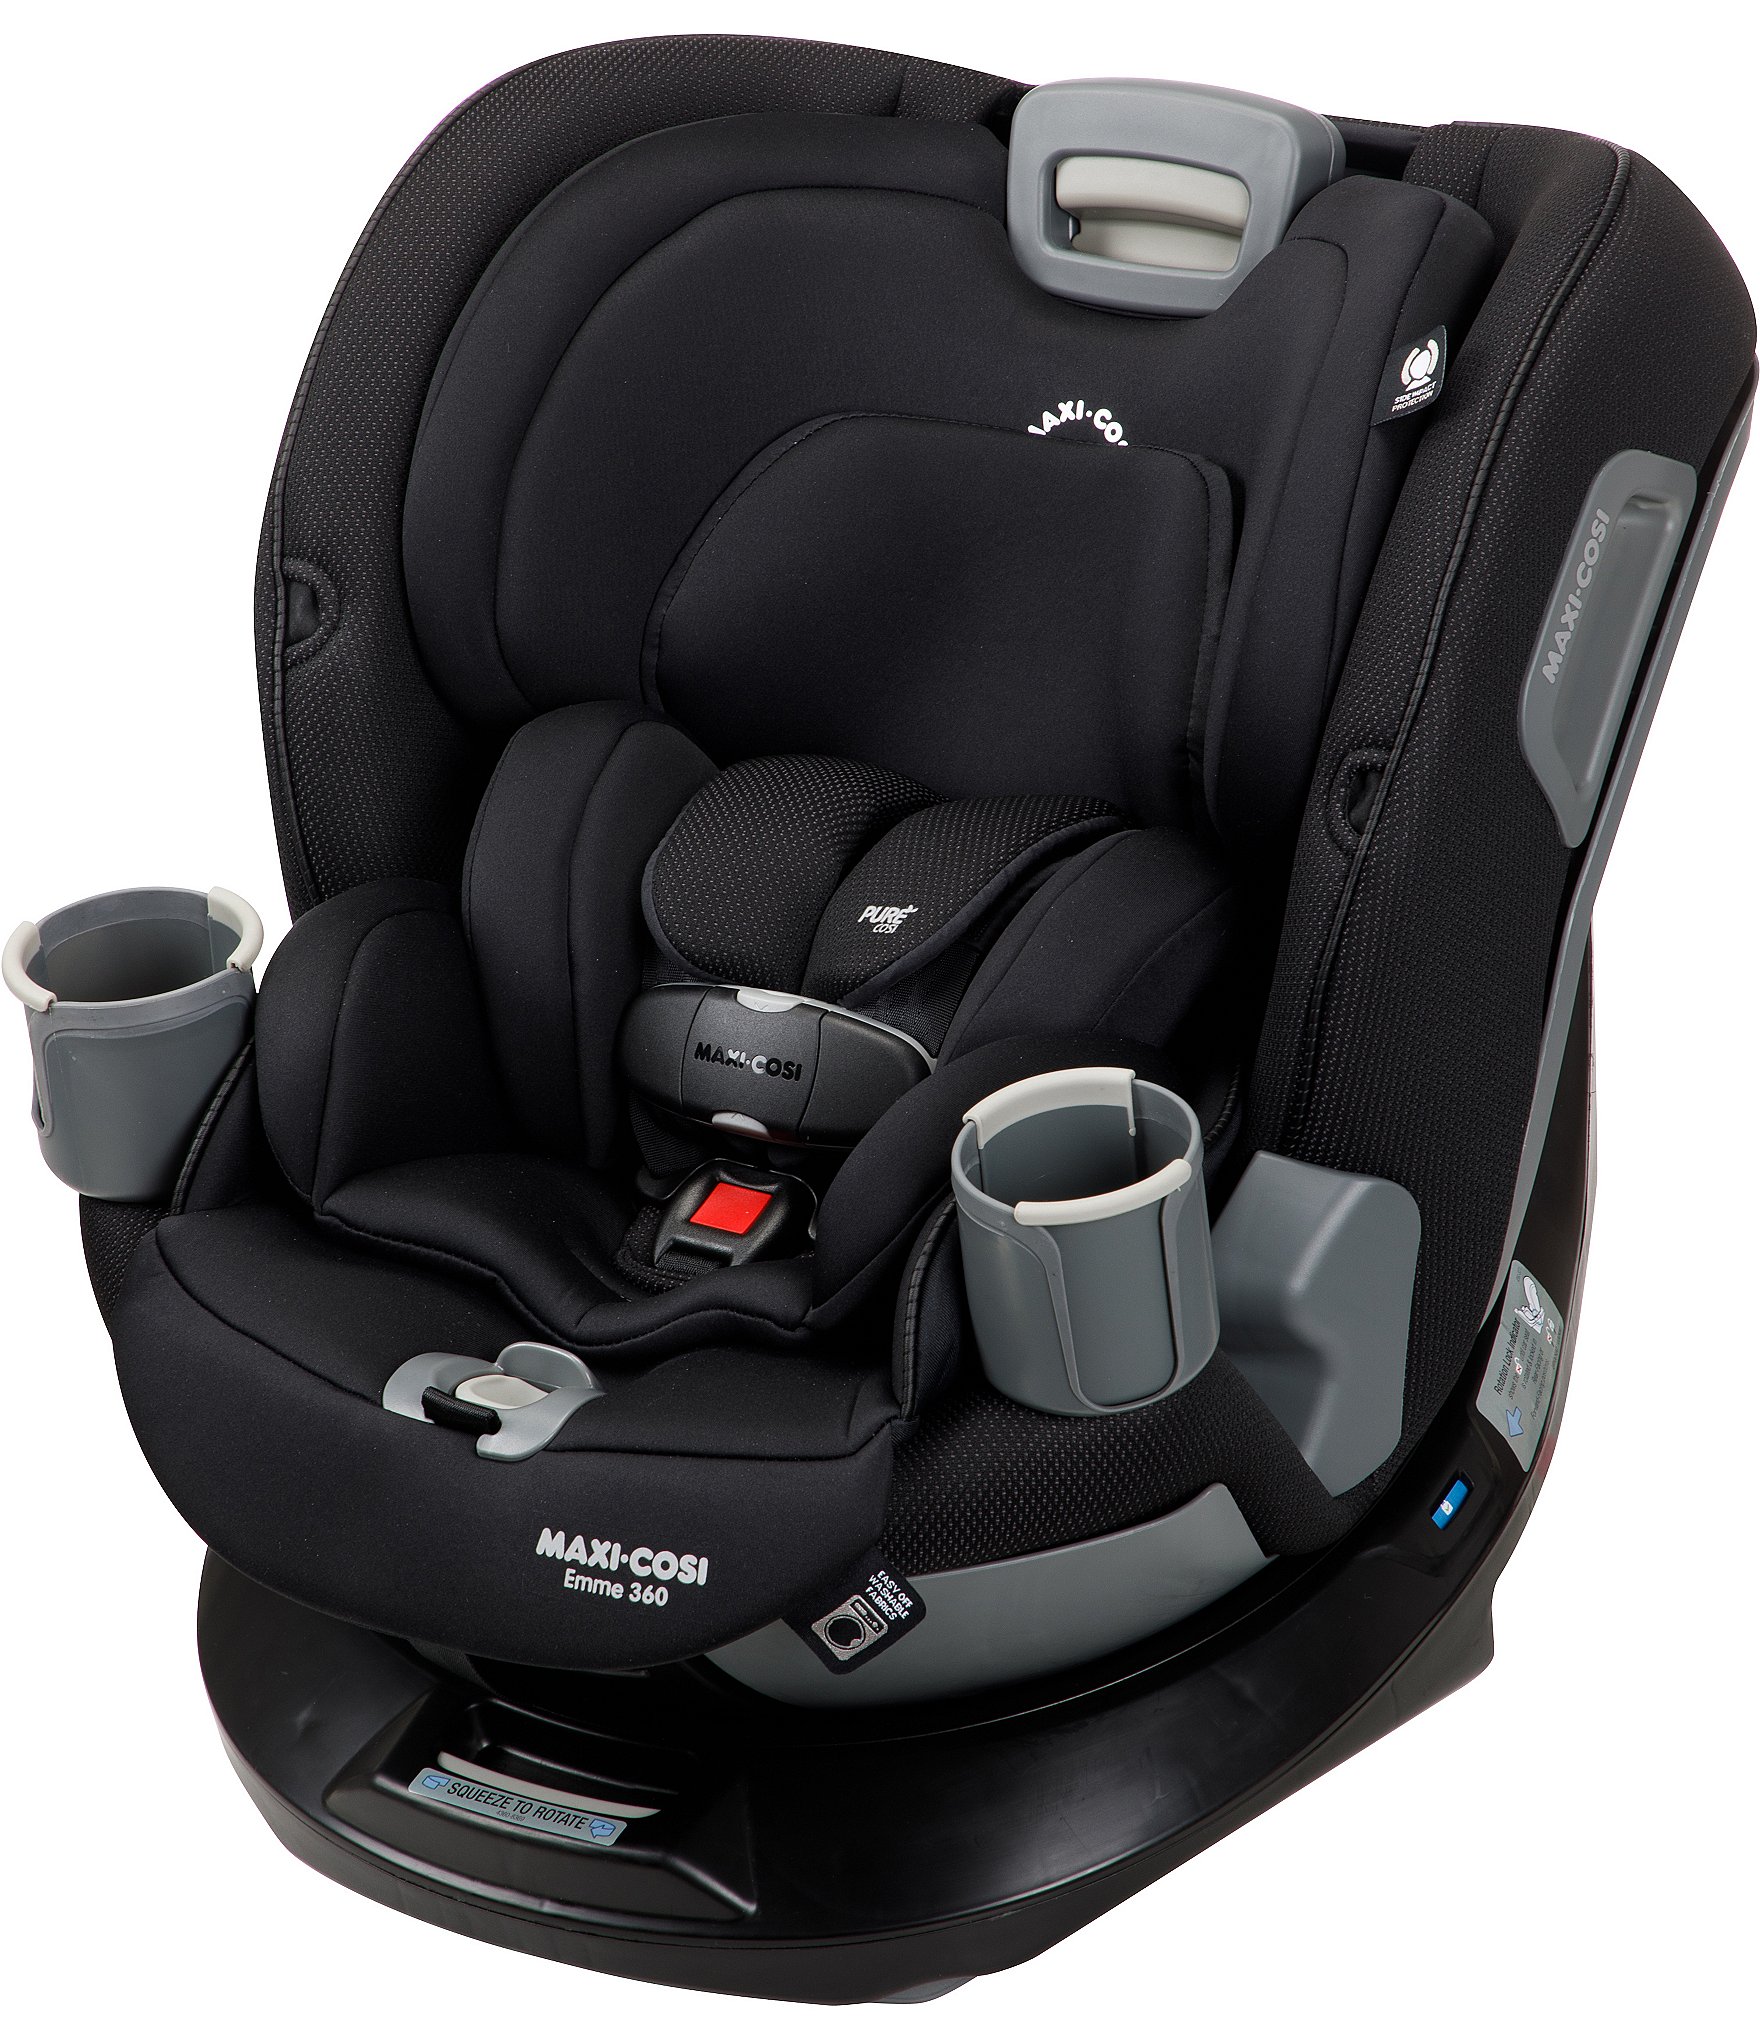 https://dimg.dillards.com/is/image/DillardsZoom/zoom/maxi-cosi-emme-360-rotating-all-in-one-convertible-car-seat/00000000_zi_43bbc85d-1083-4a30-8872-20e04c9090cb.jpg